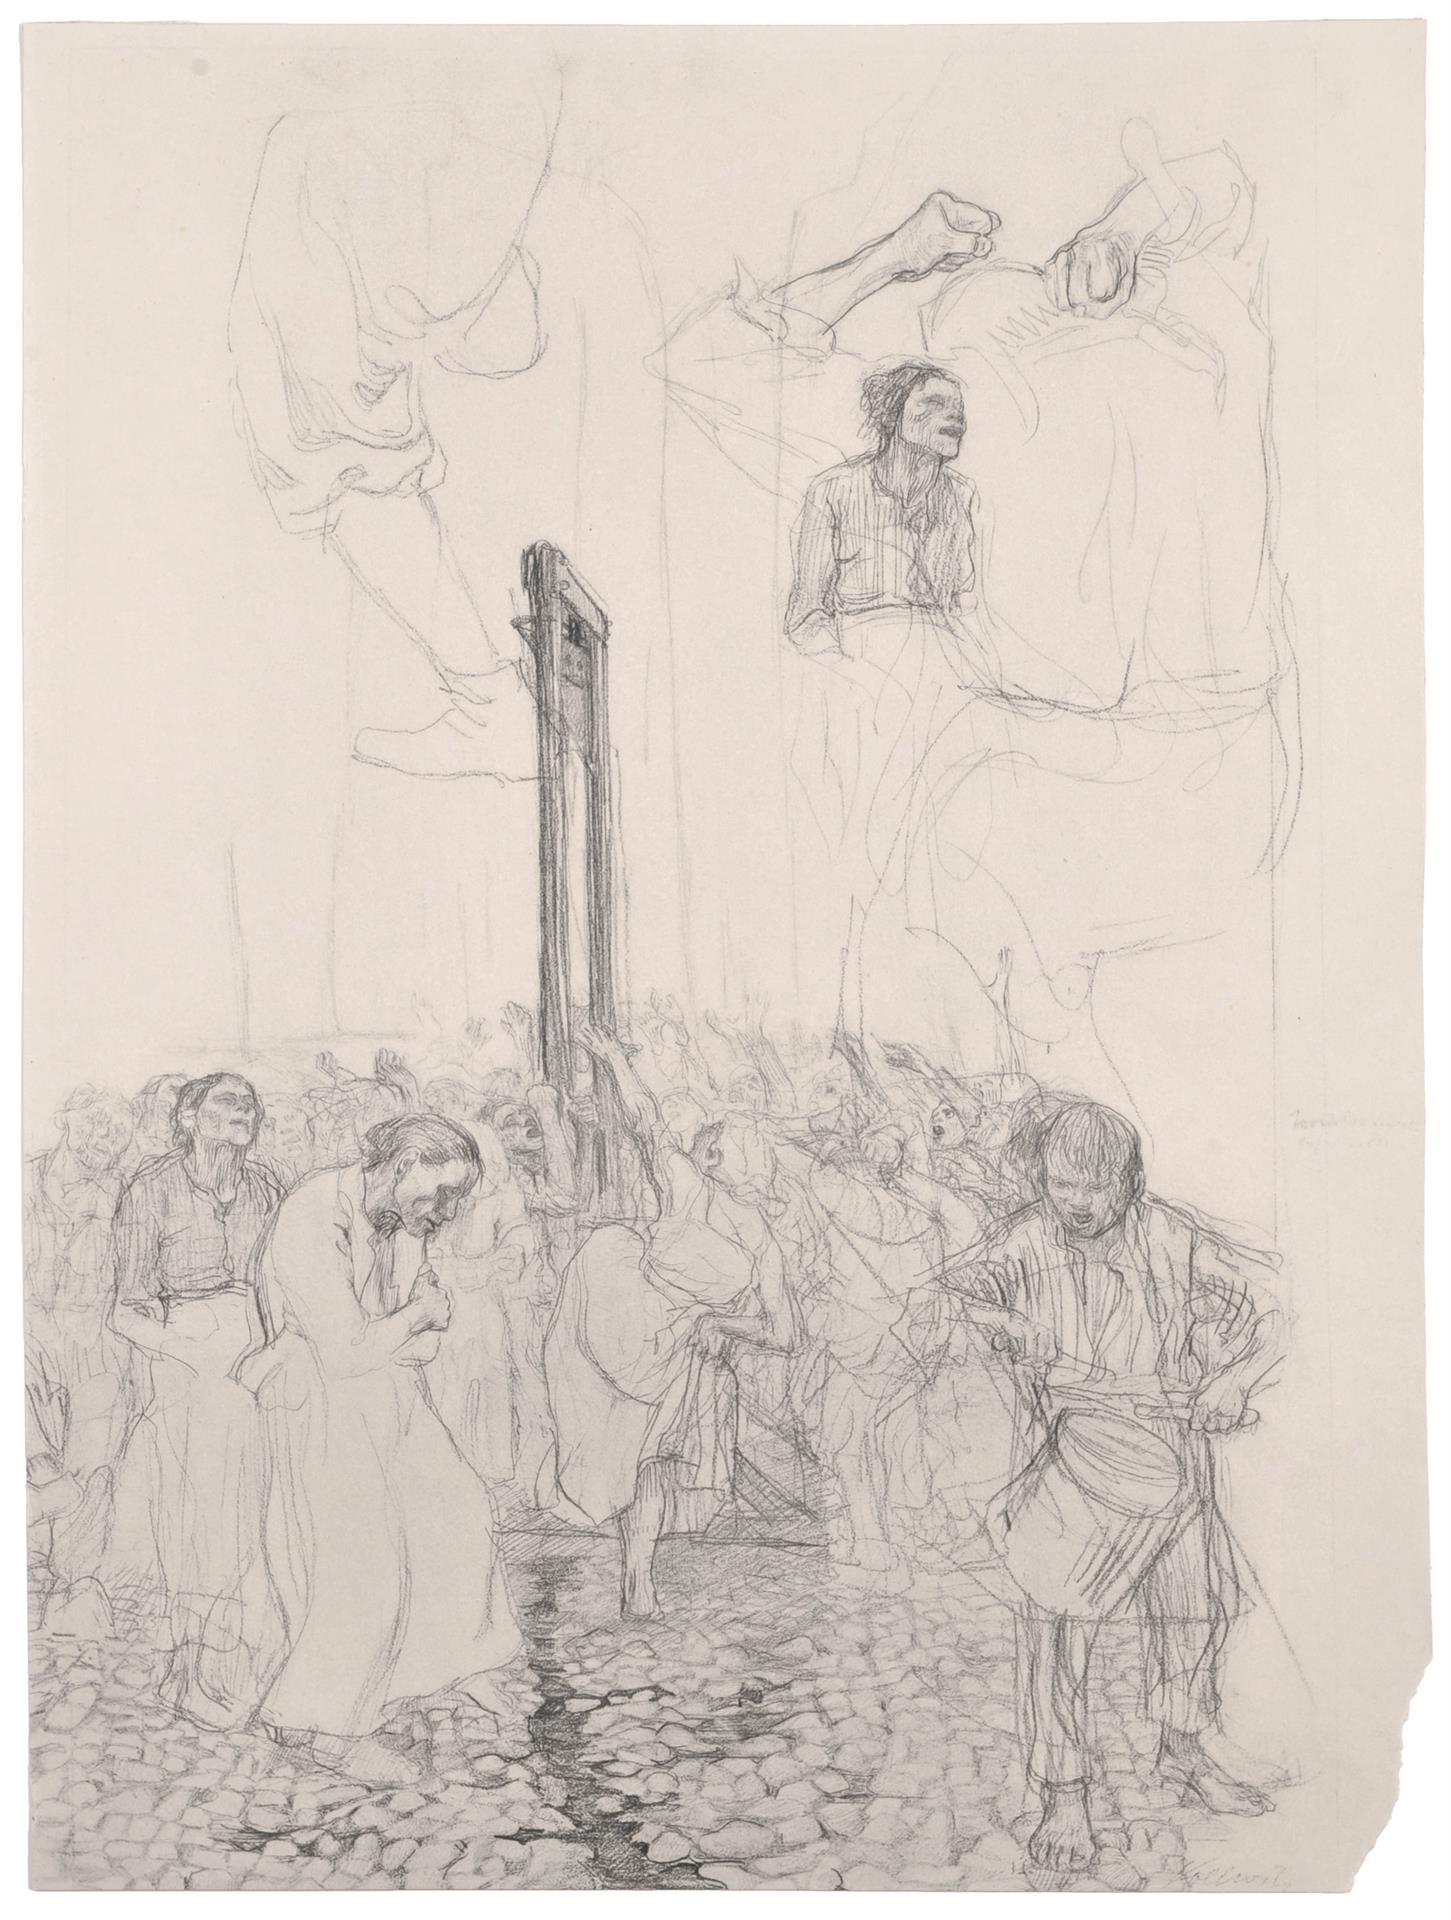 Käthe Kolwitz, Dance around the Guillotine, folio 9 of the »Richter Portfolio«, facsimile of the hand drawing NT 179, 1901, pencil, private collection, Berlin